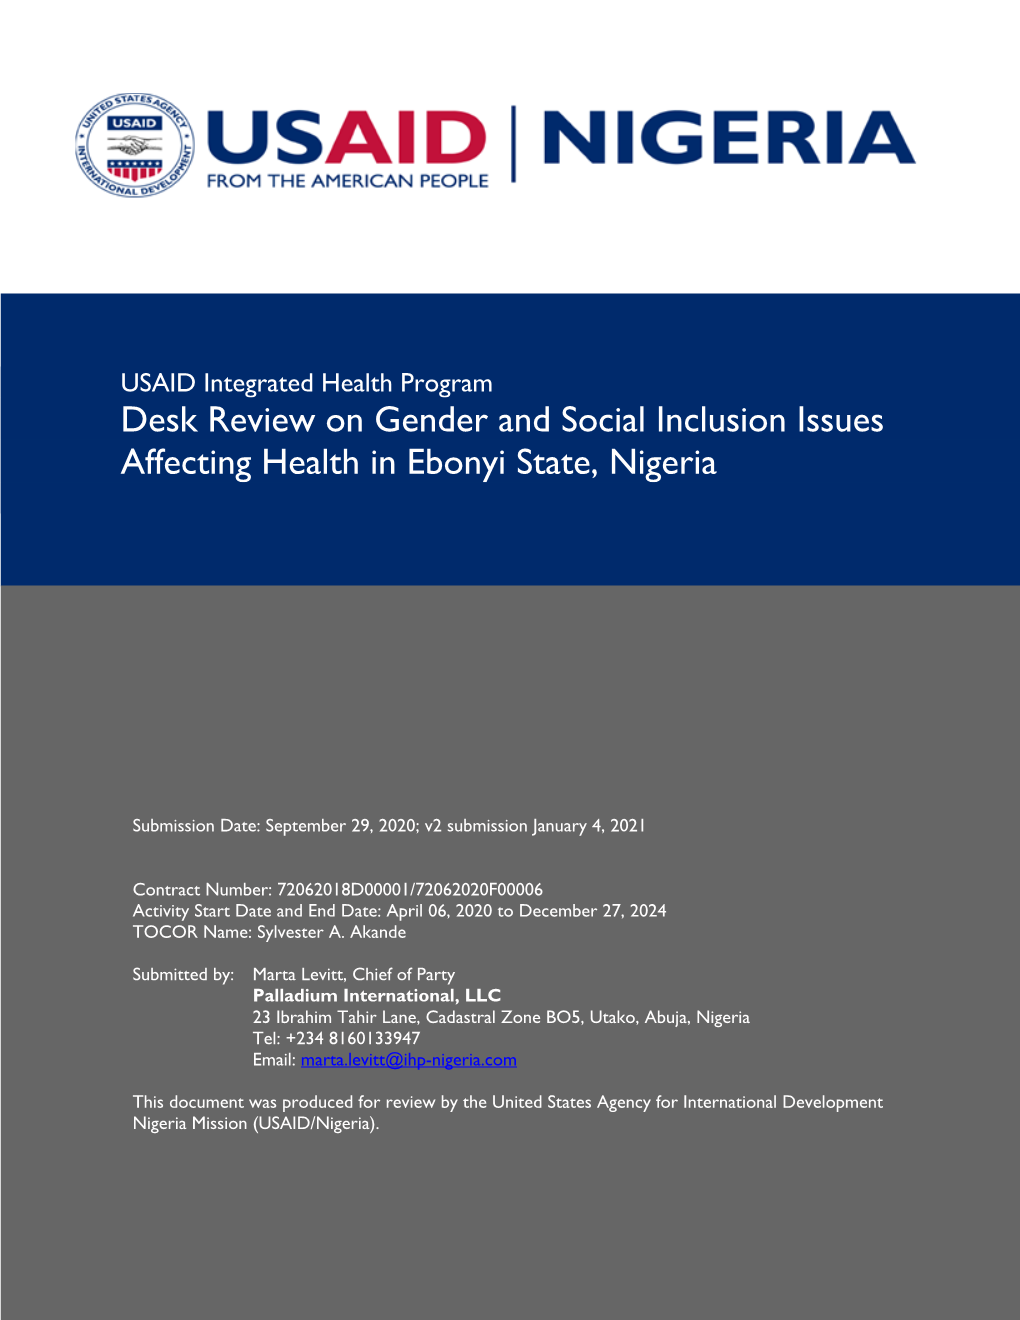 Desk Review on Gender and Social Inclusion Issues Affecting Health in Ebonyi State, Nigeria